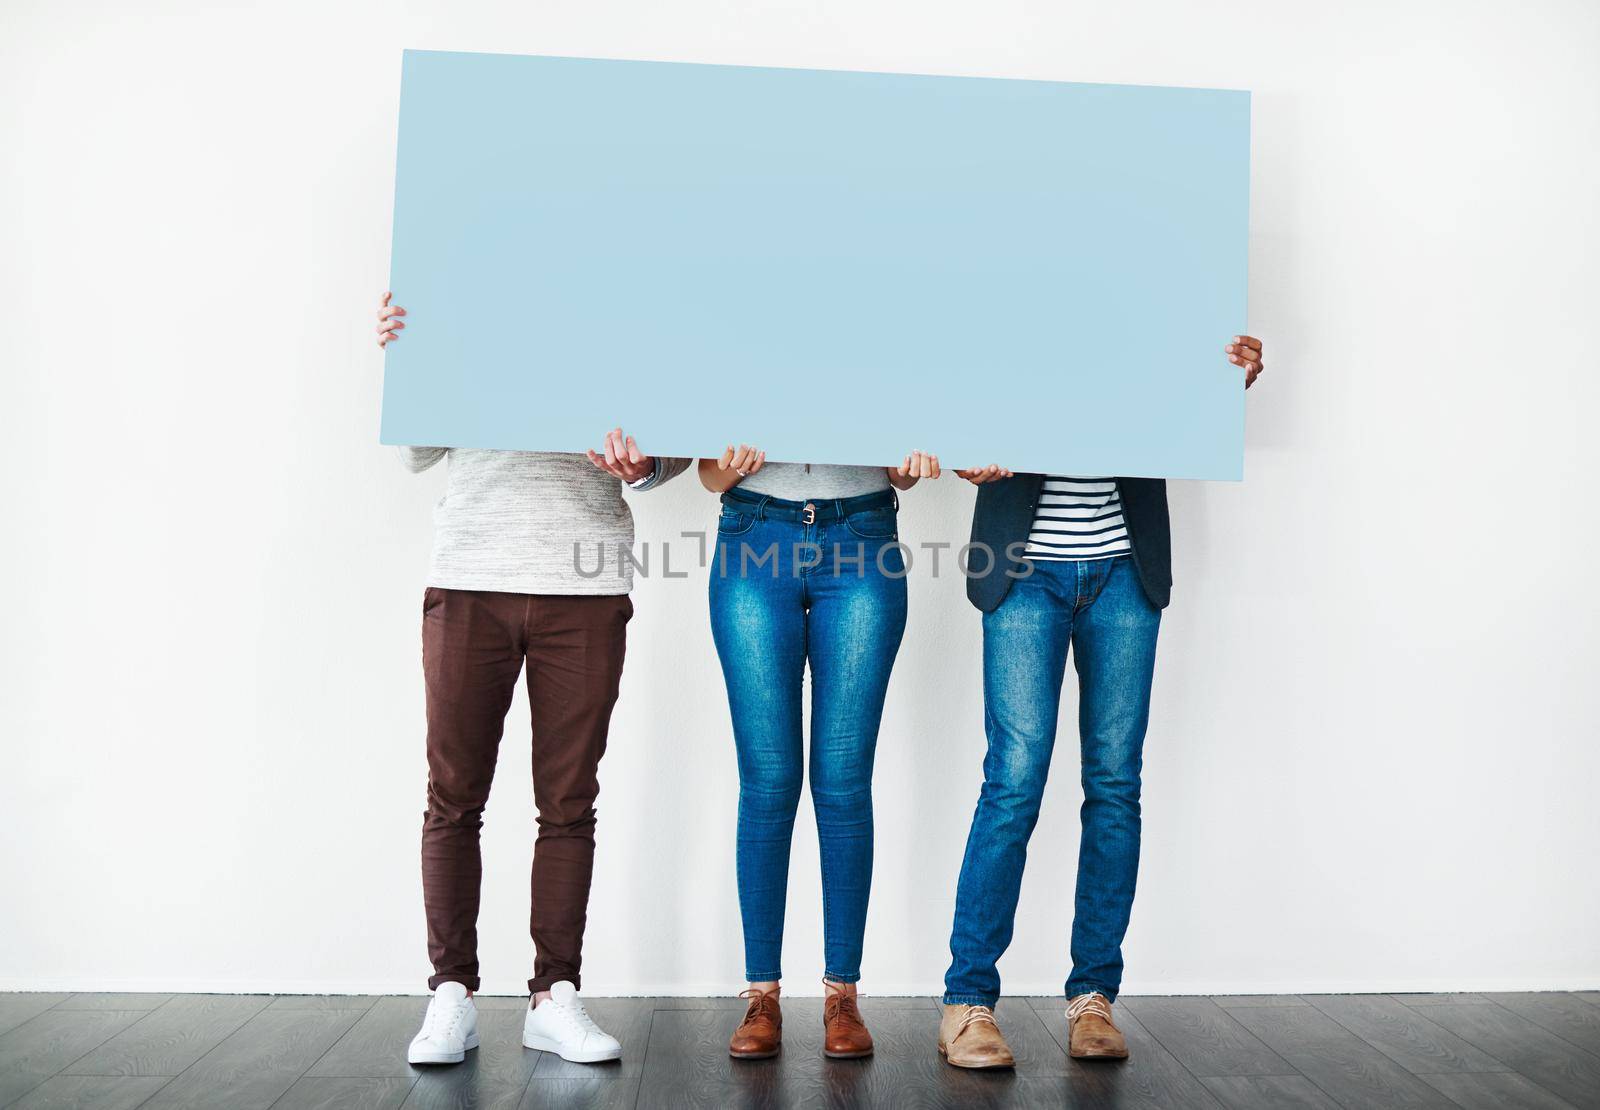 Say whats on your mind. Studio shot of a group of people covering themselves with a blank placard against a white background